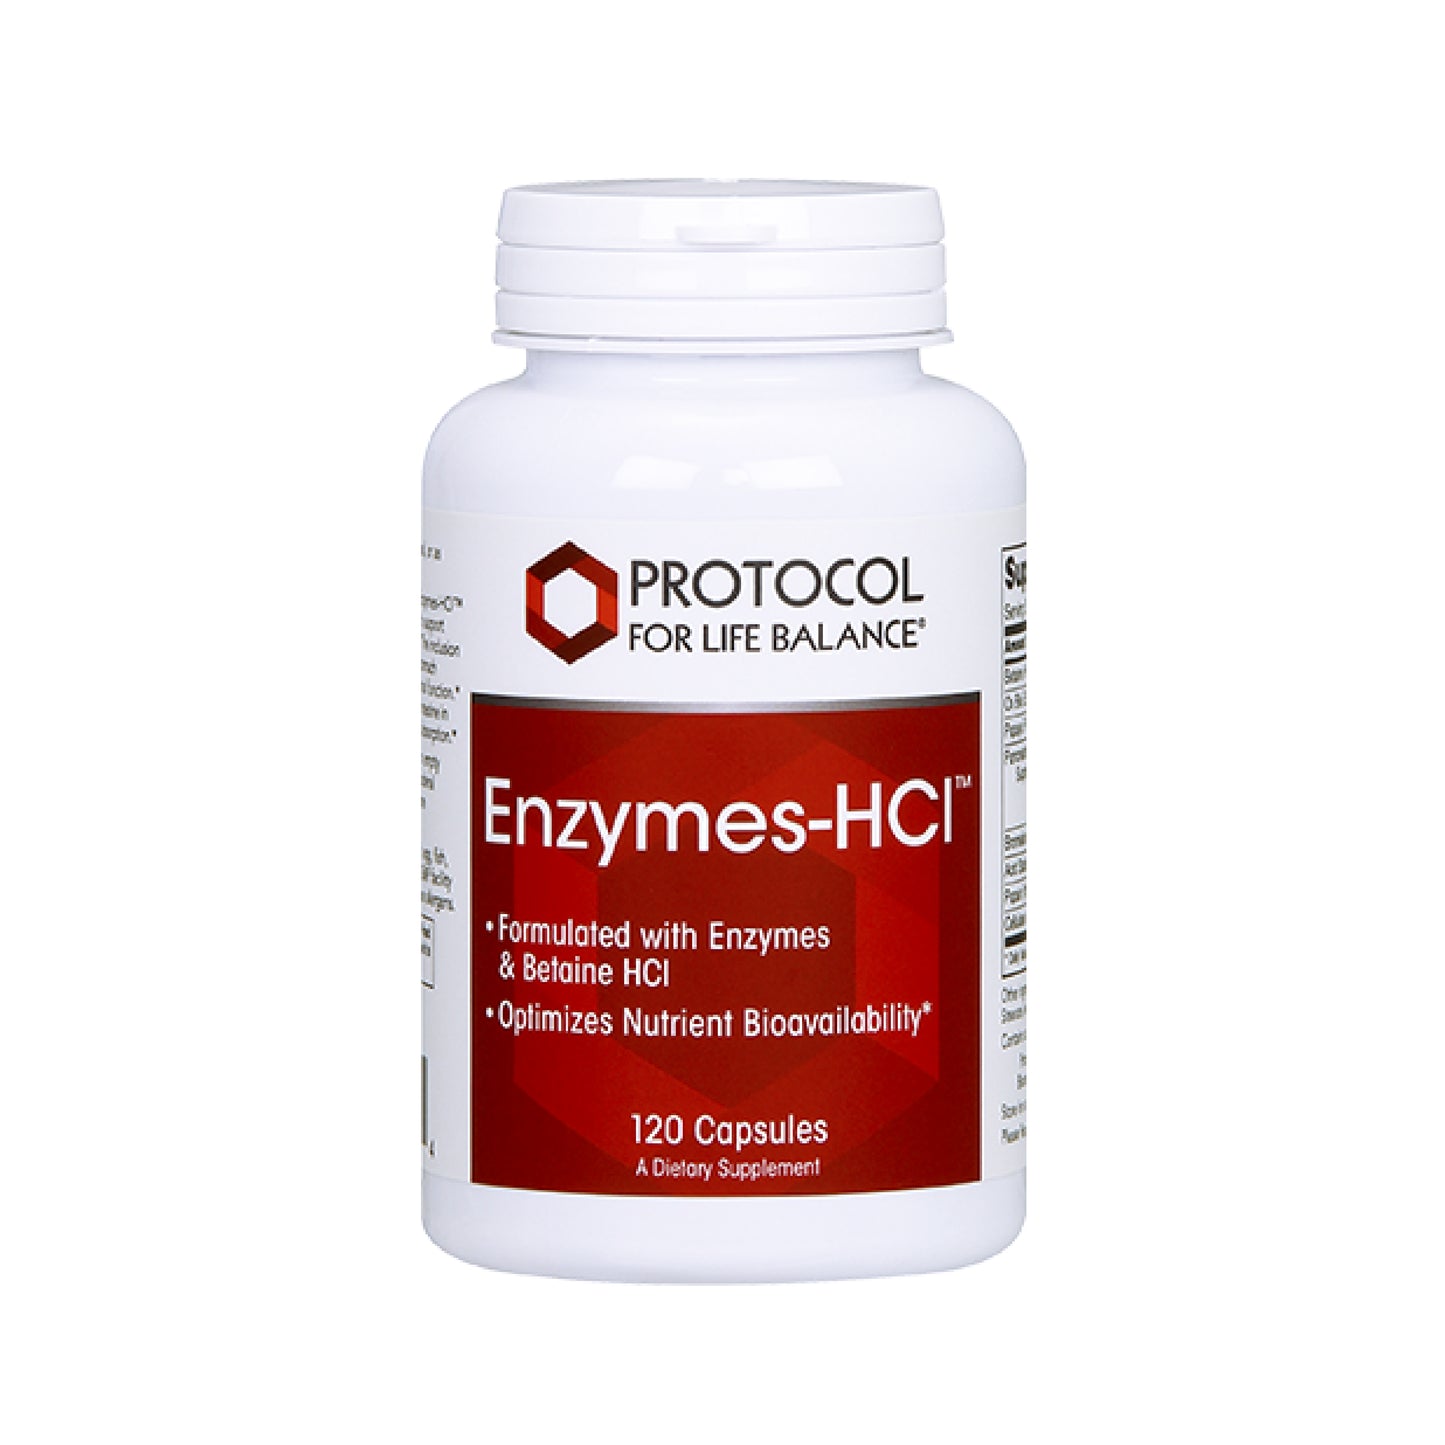 Protocol for Life Balance, Enzymes-HCl, 120 Capsules